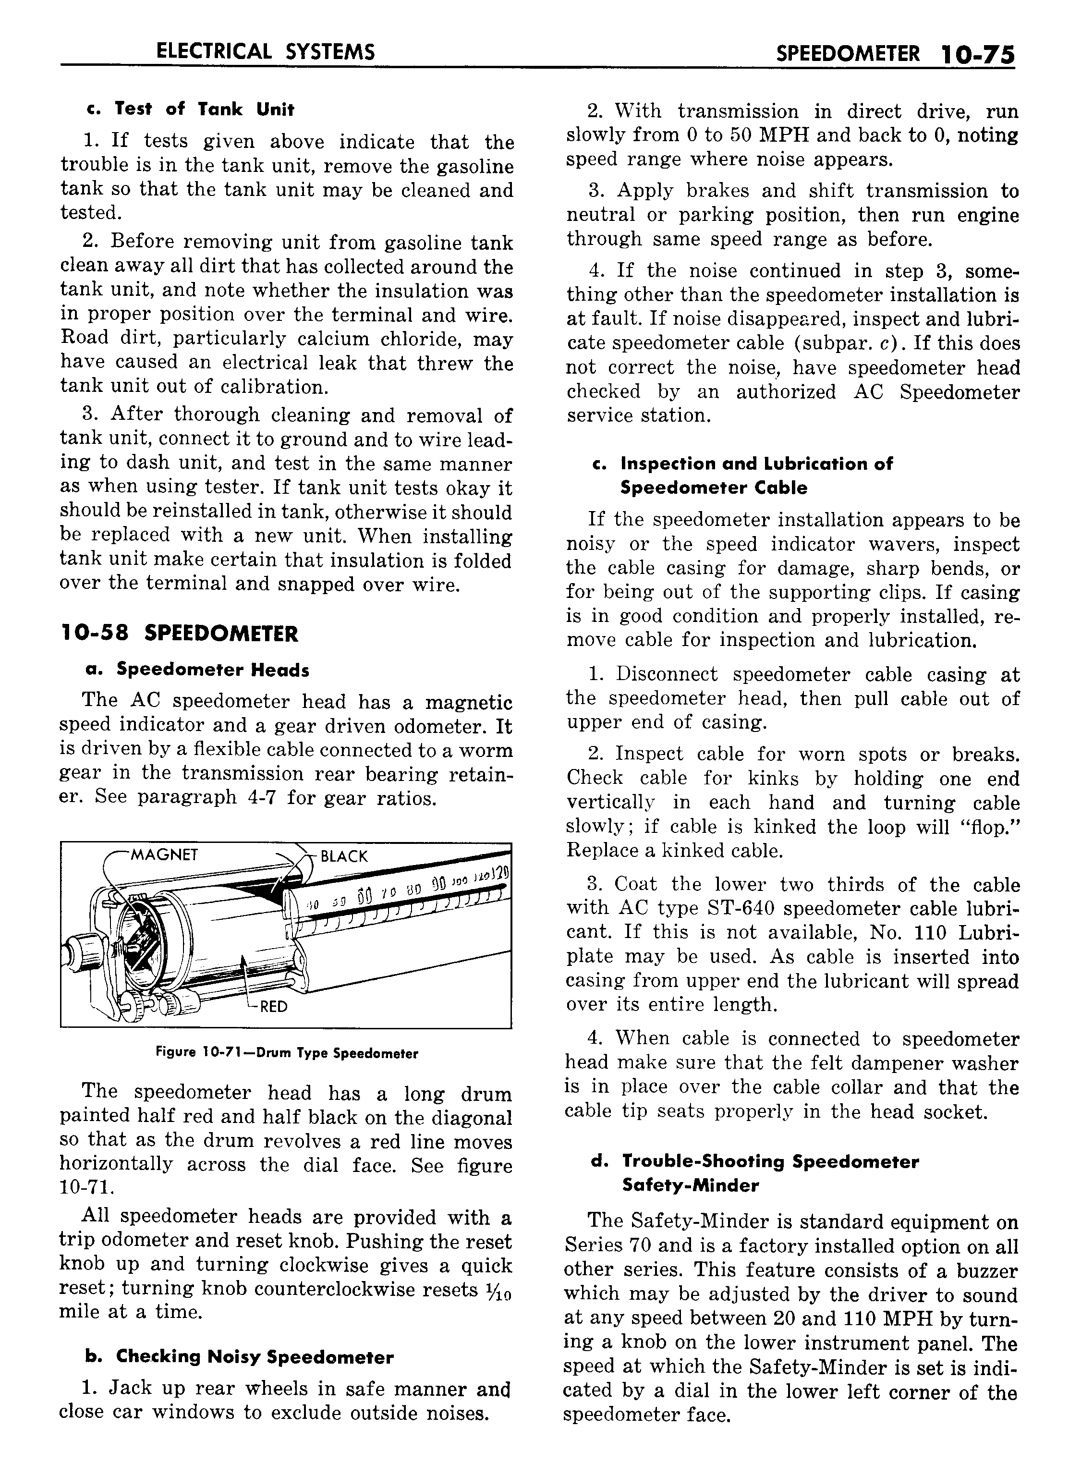 n_11 1957 Buick Shop Manual - Electrical Systems-075-075.jpg